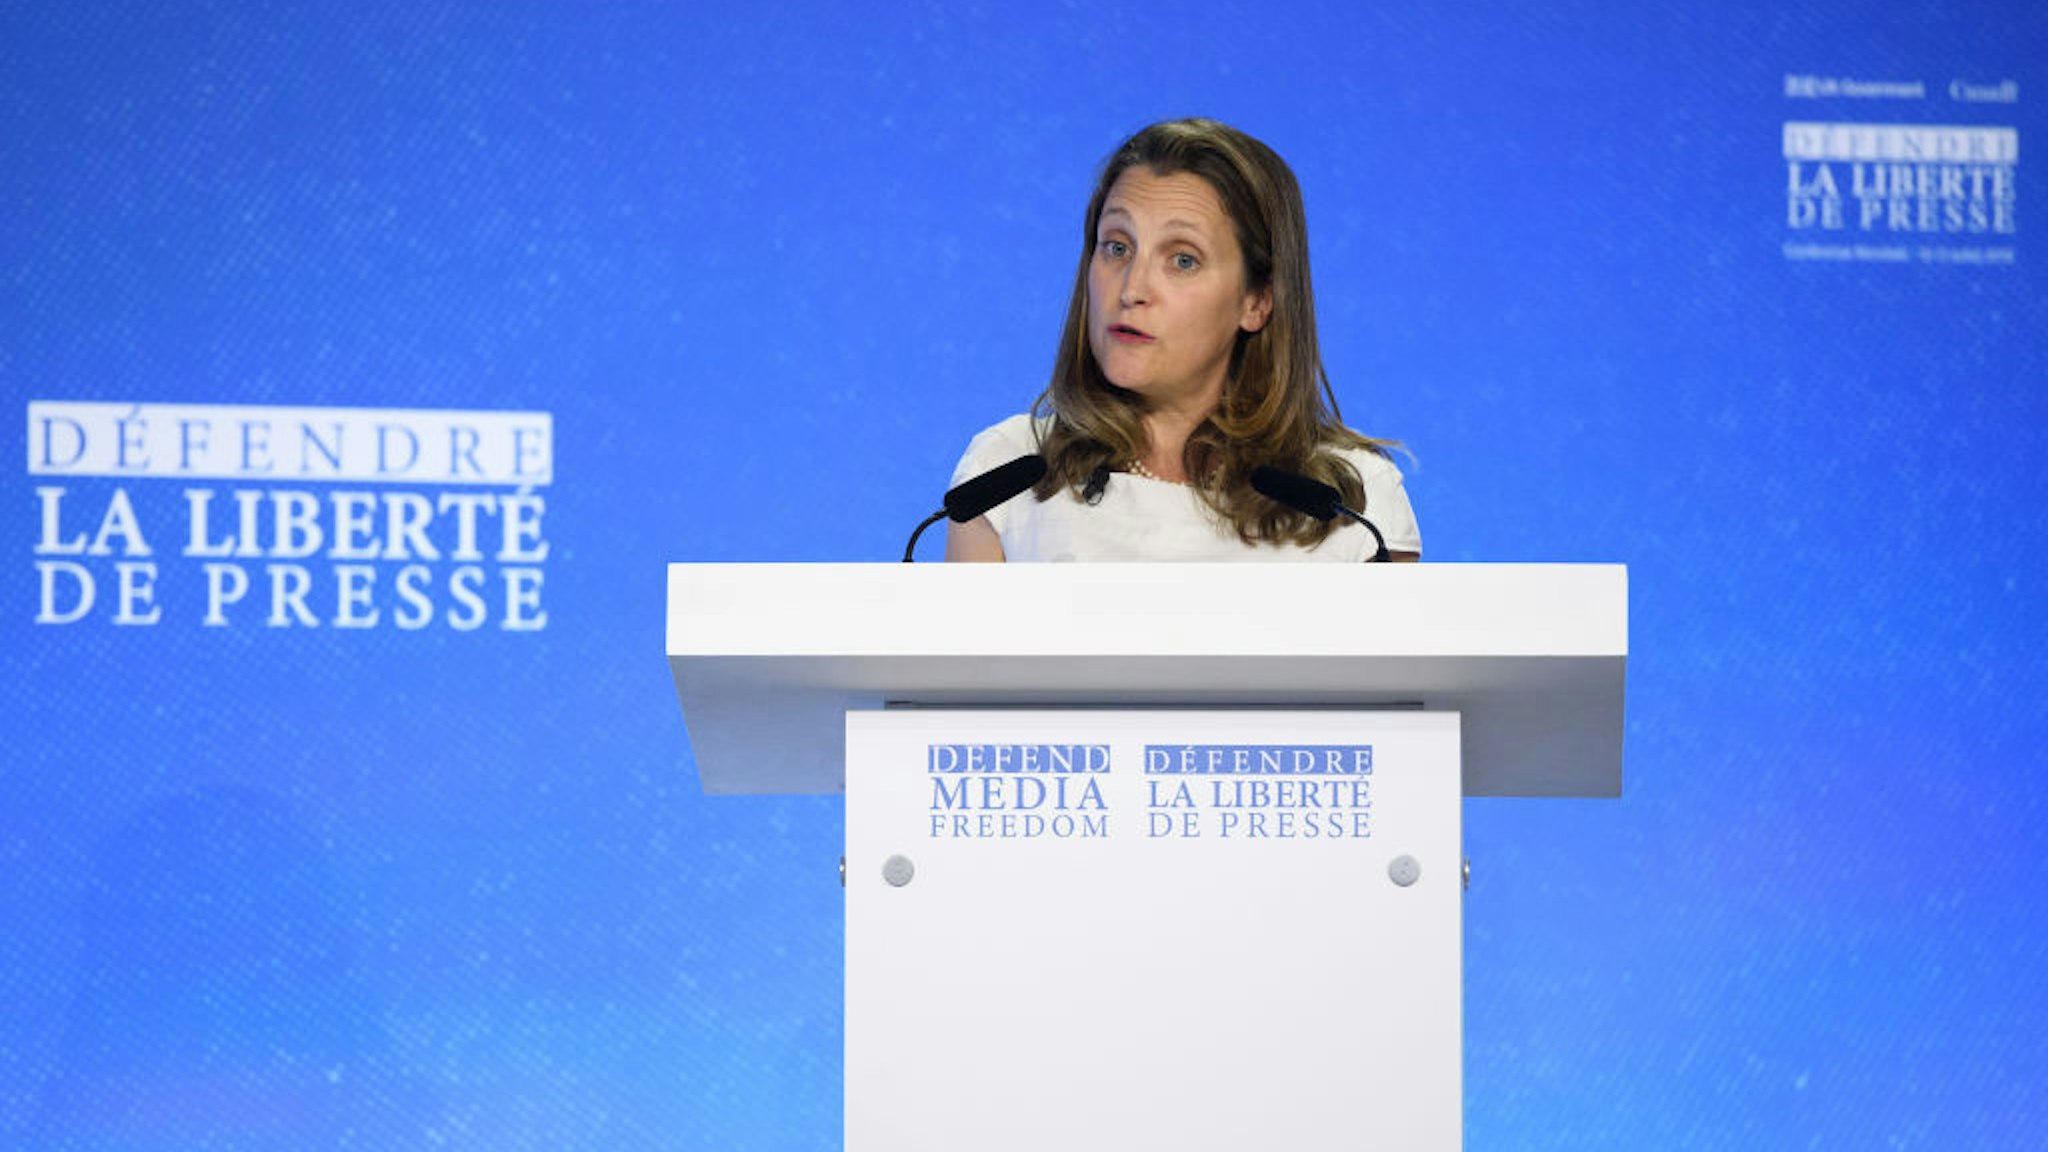 LONDON, ENGLAND - JULY 11: Canada's Foreign Secretary Chrystia Freeland speaks to delegates during day two of the Global Conference on Press Freedom on July 11, 2019 in London, England. The conference sees speakers from around the world sharing their experiences and thoughts on protecting the rights of members of the media around the world. (Photo by Leon Neal/Getty Images)